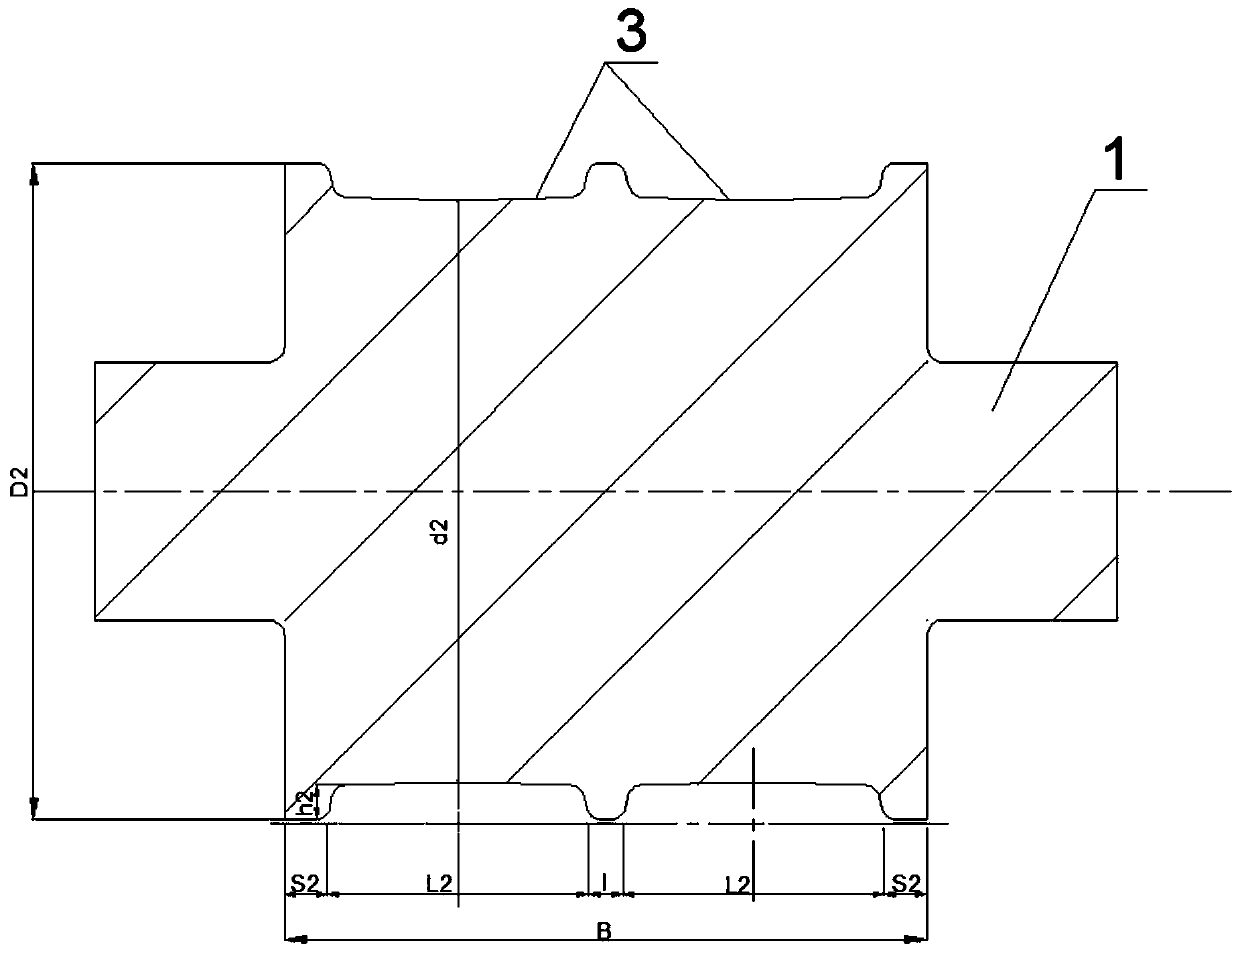 Blooming down-the-hole pattern design method used on continuous rolling mill